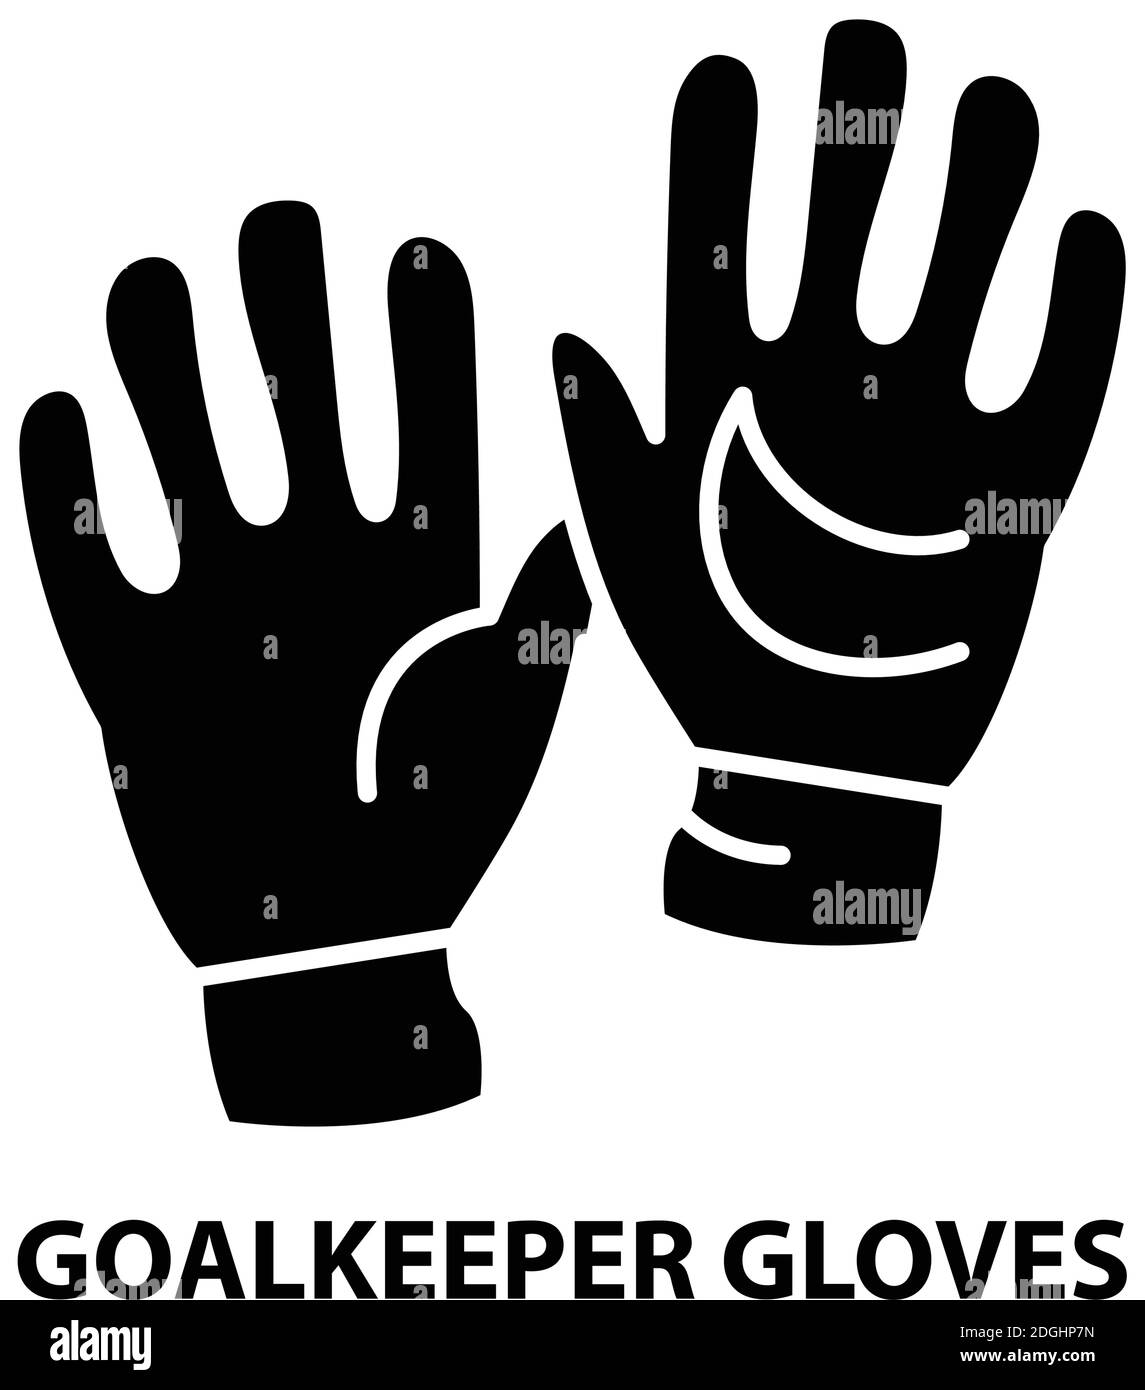 goalkeeper gloves icon, black vector sign with editable strokes, concept illustration Stock Vector